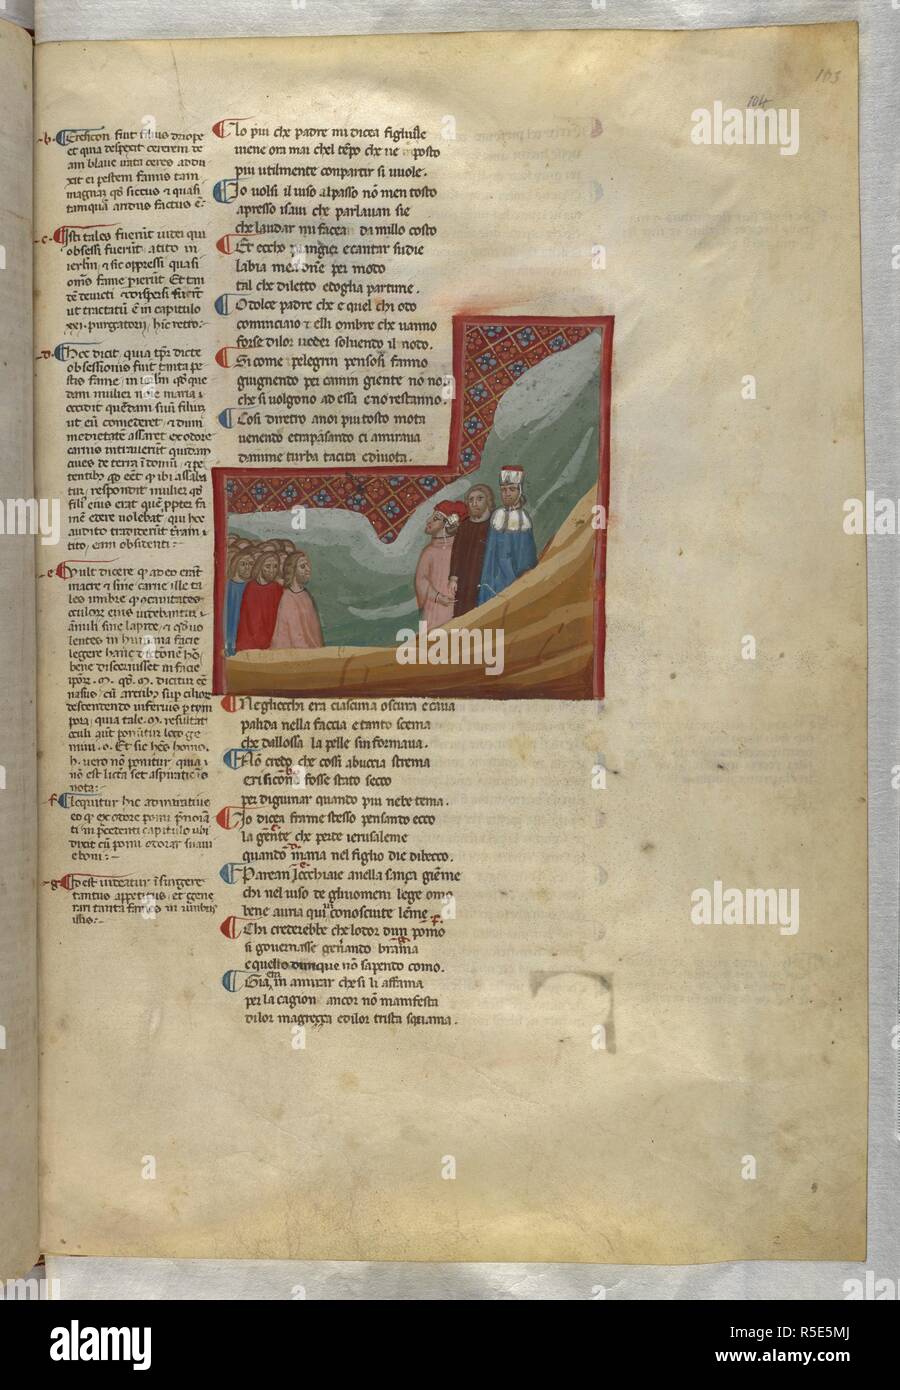 Purgatorio: They meet the gluttons. Dante Alighieri, Divina Commedia ( The Divine Comedy ), with a commentary in Latin. 1st half of the 14th century. Source: Egerton 943, f.104. Language: Italian, Latin. Stock Photo